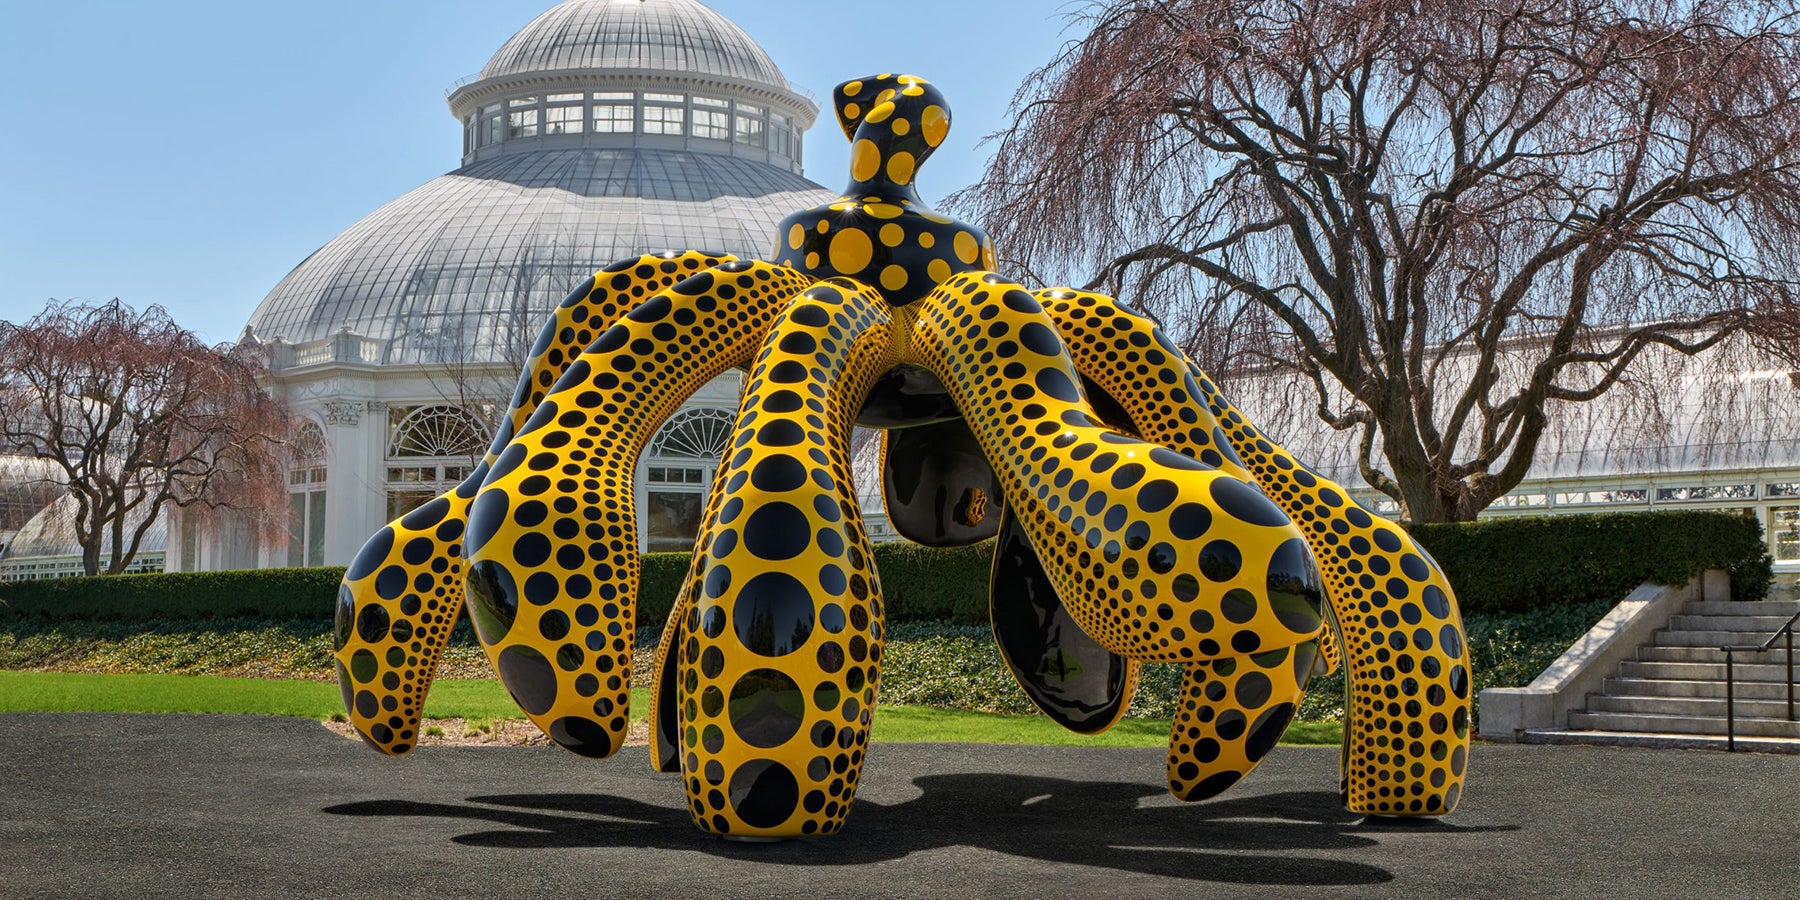 From Yayoi Kusama’s New Show to Your Veggie Garden, Outdoor Sculpture Wows